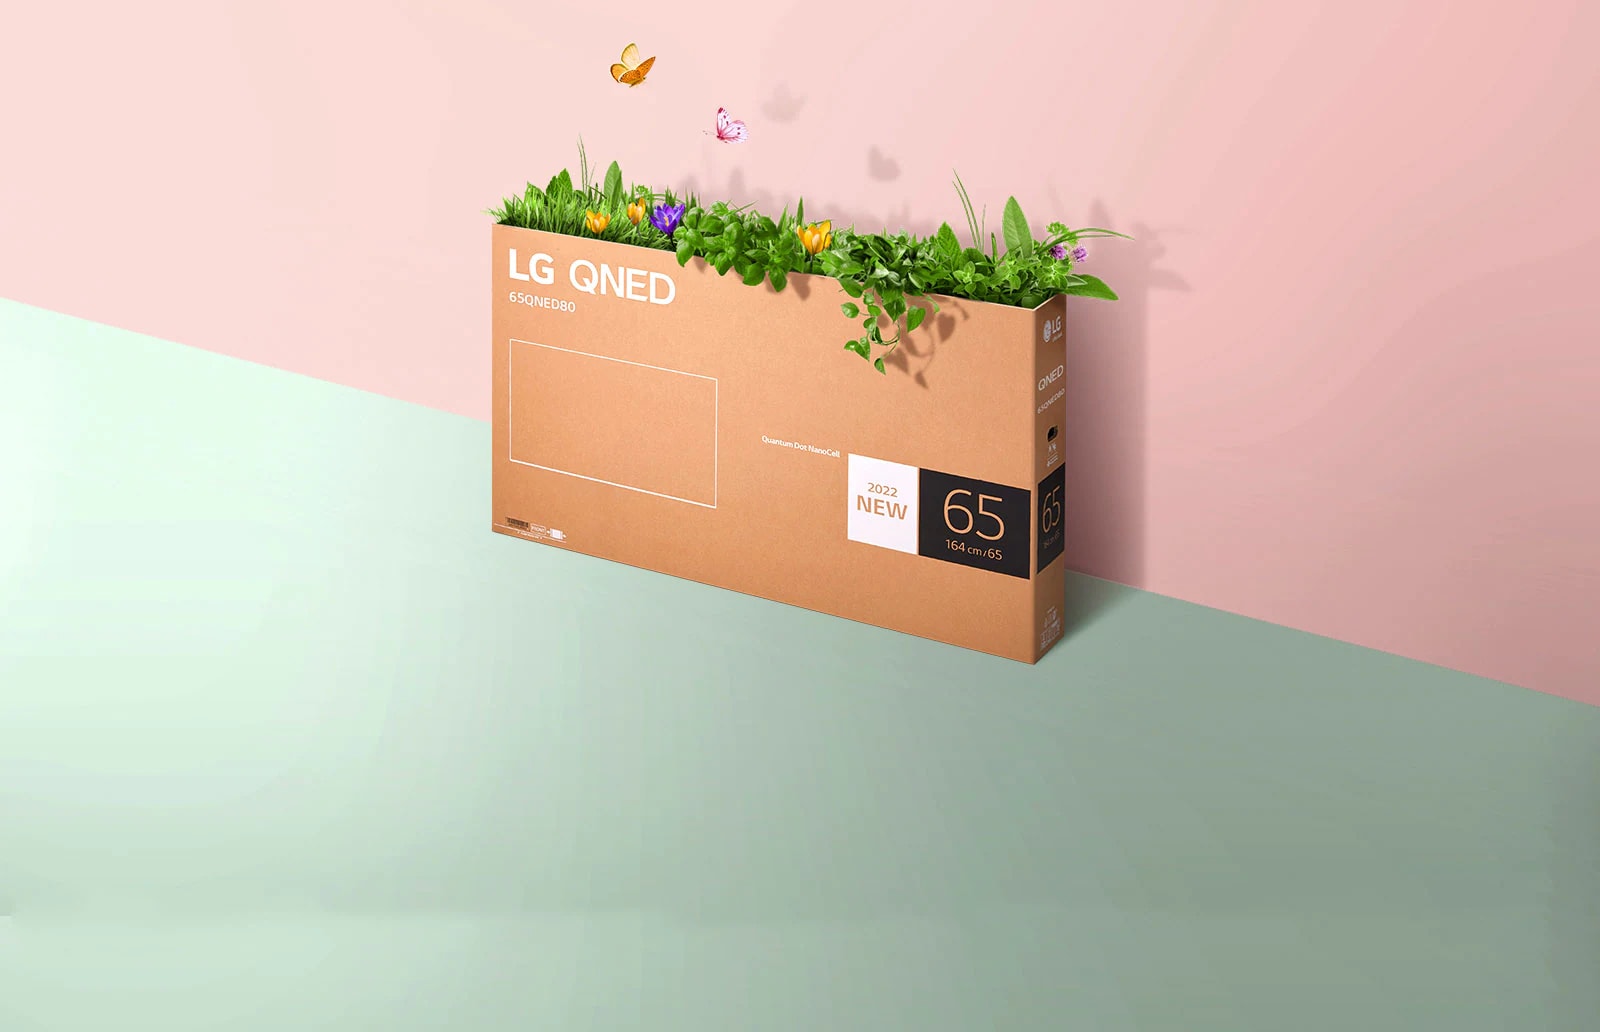 The QNED packaging box is set against a pink and green background, with grass growing inside and butterflies flying out.